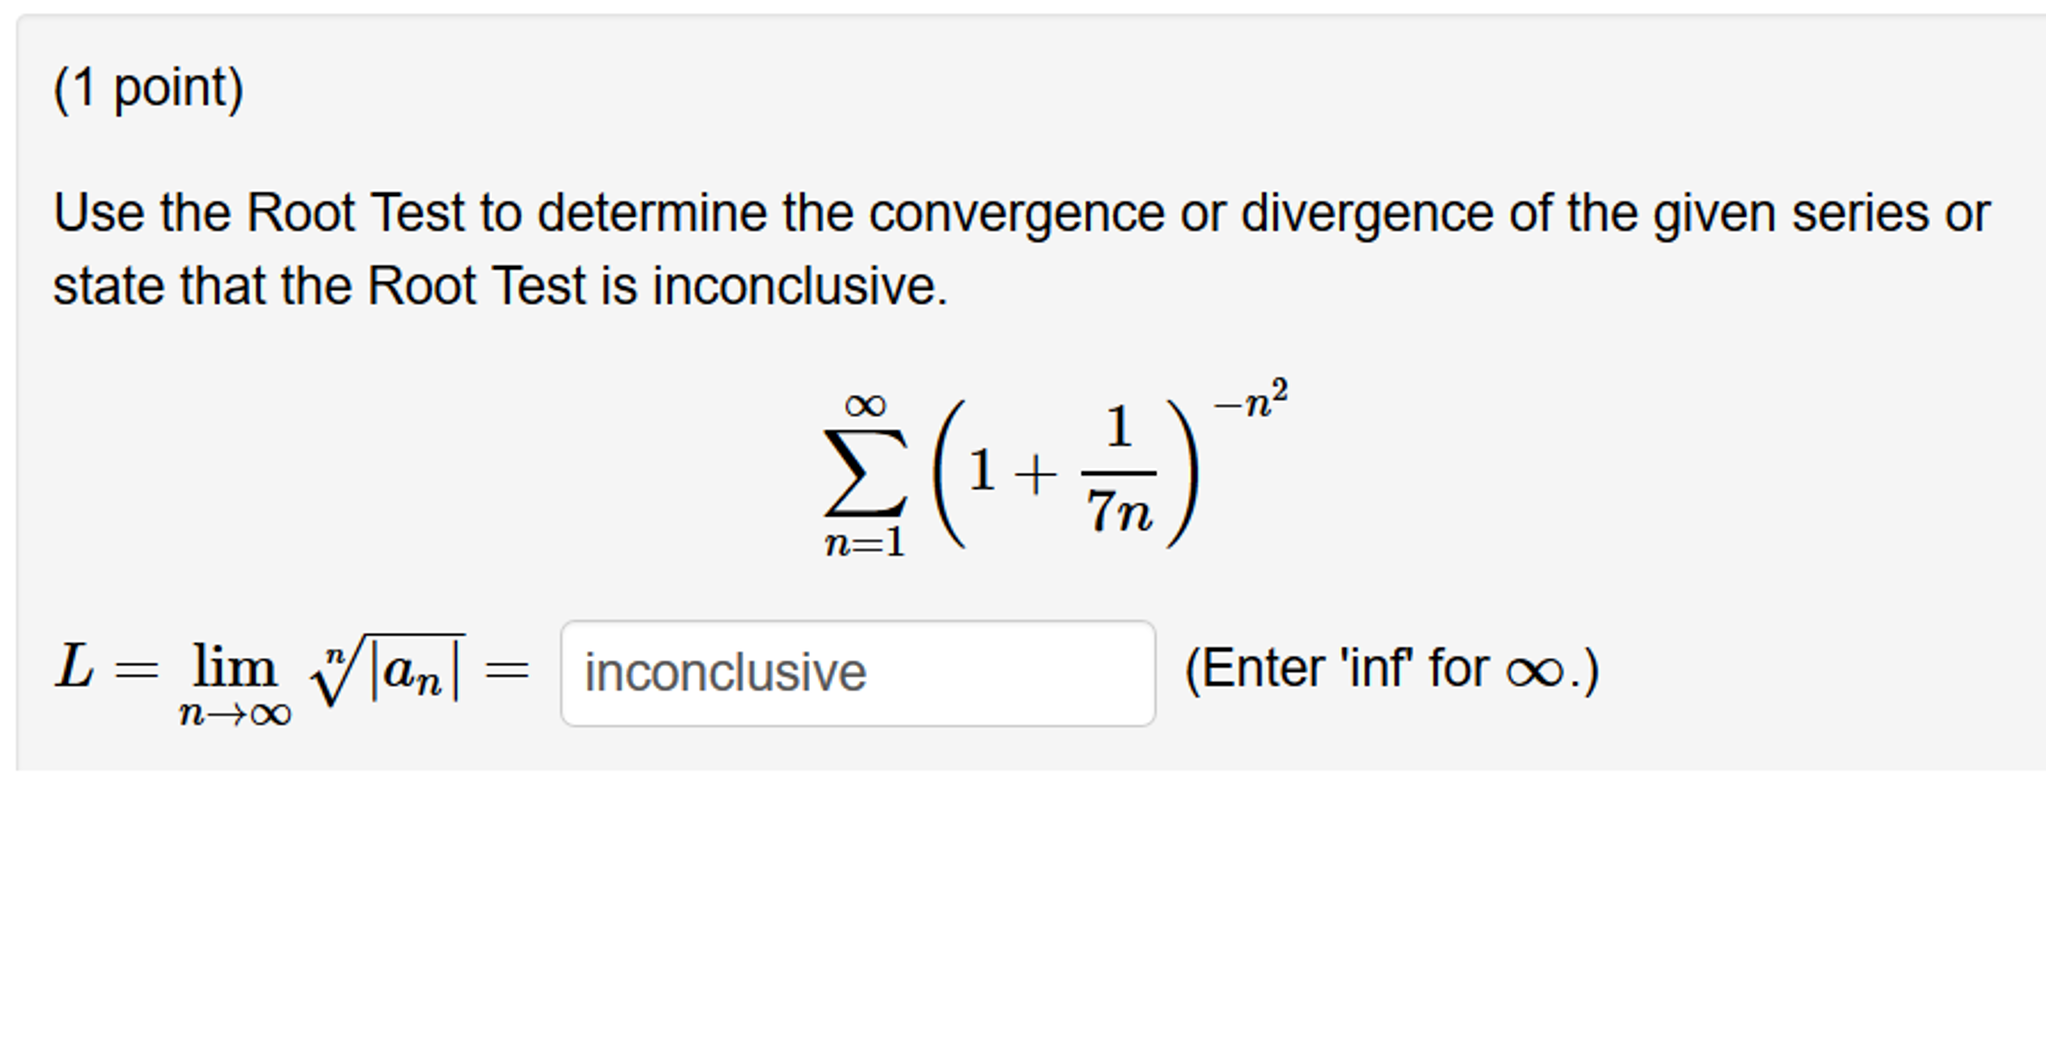 square root sequences convergence divergence